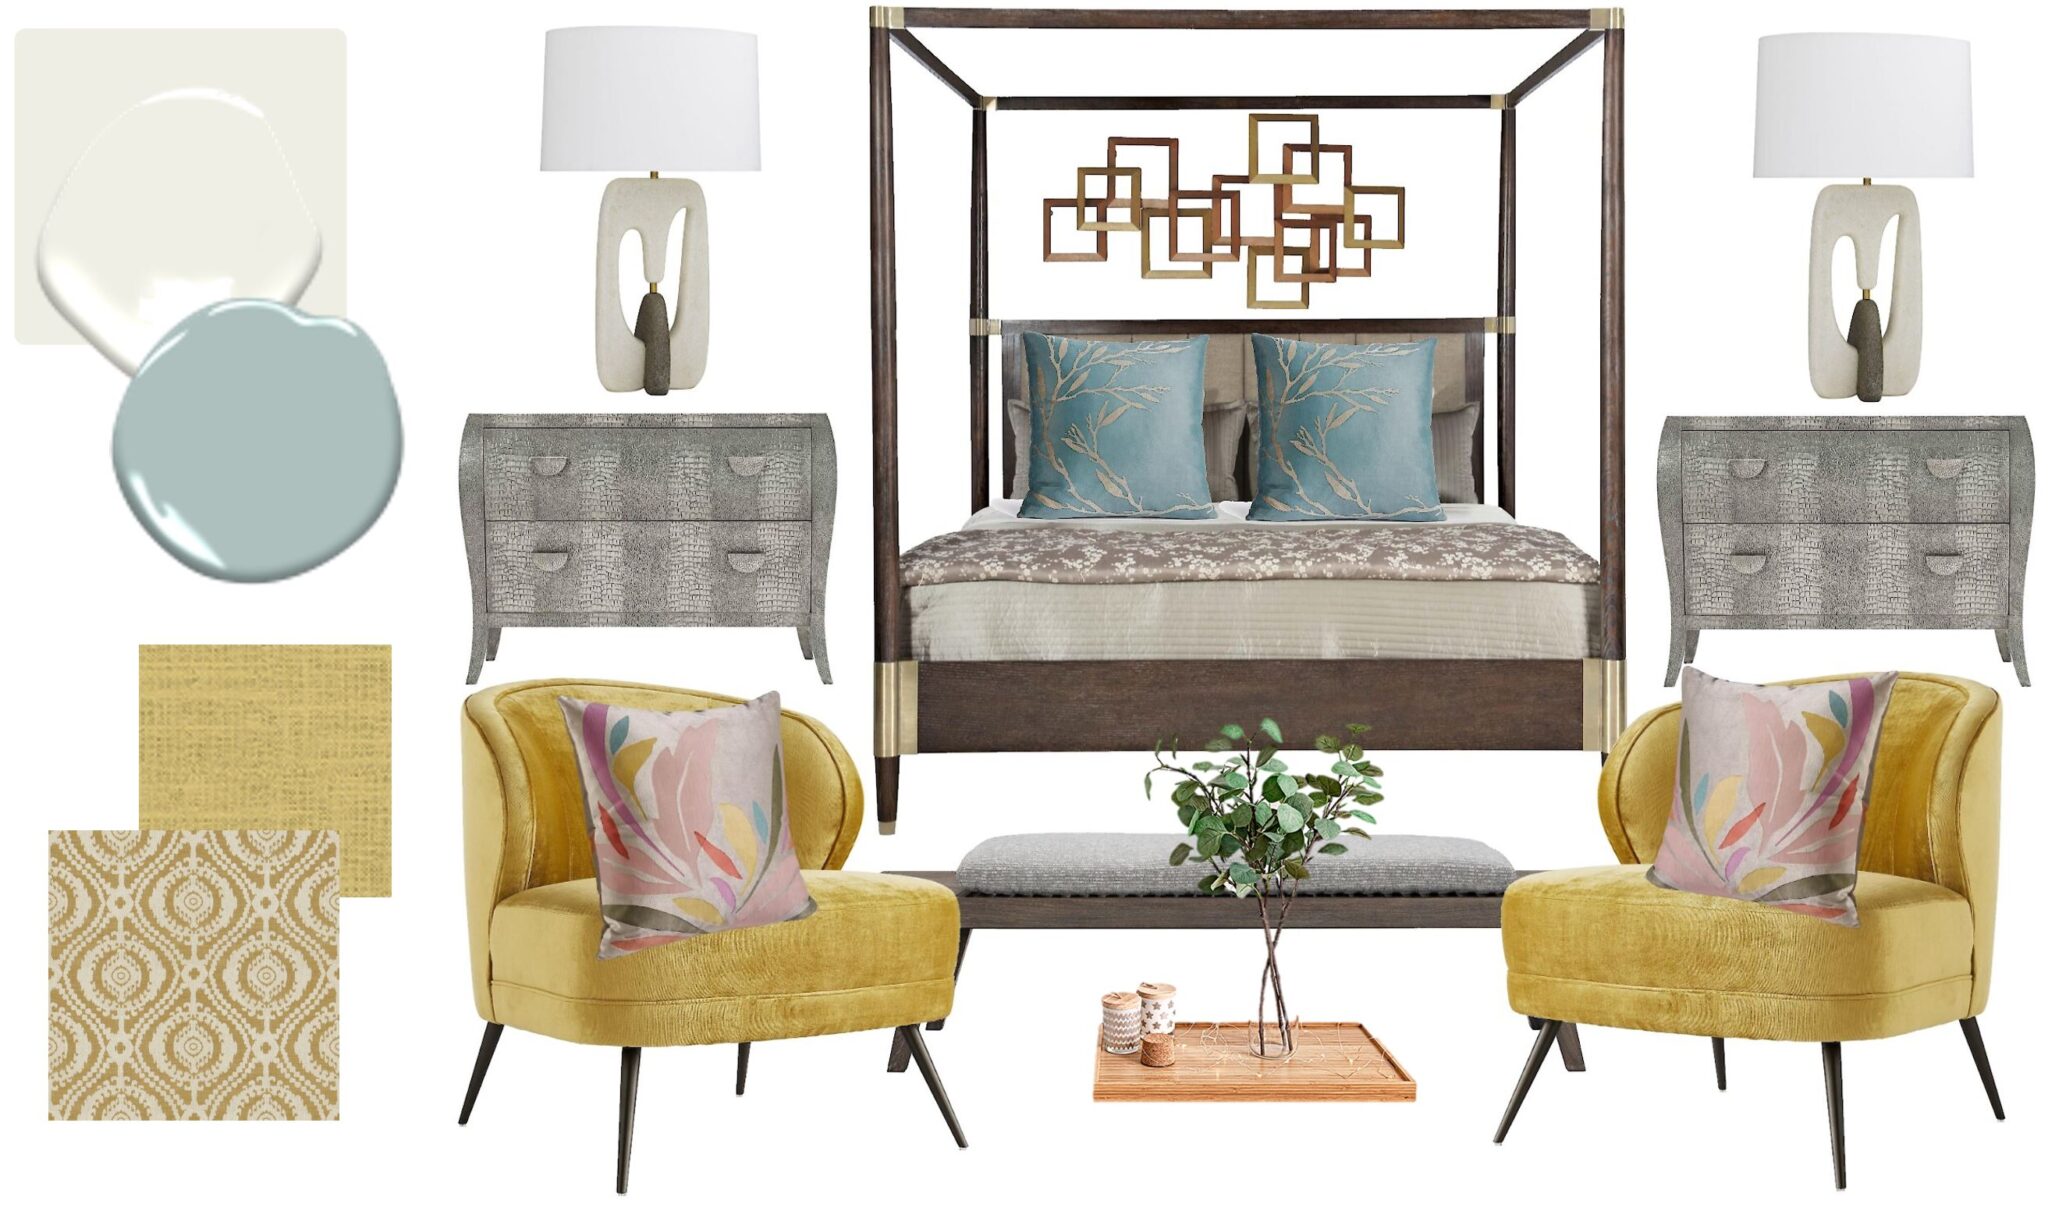 Sophisticated and Stylish Bedroom Moodboard